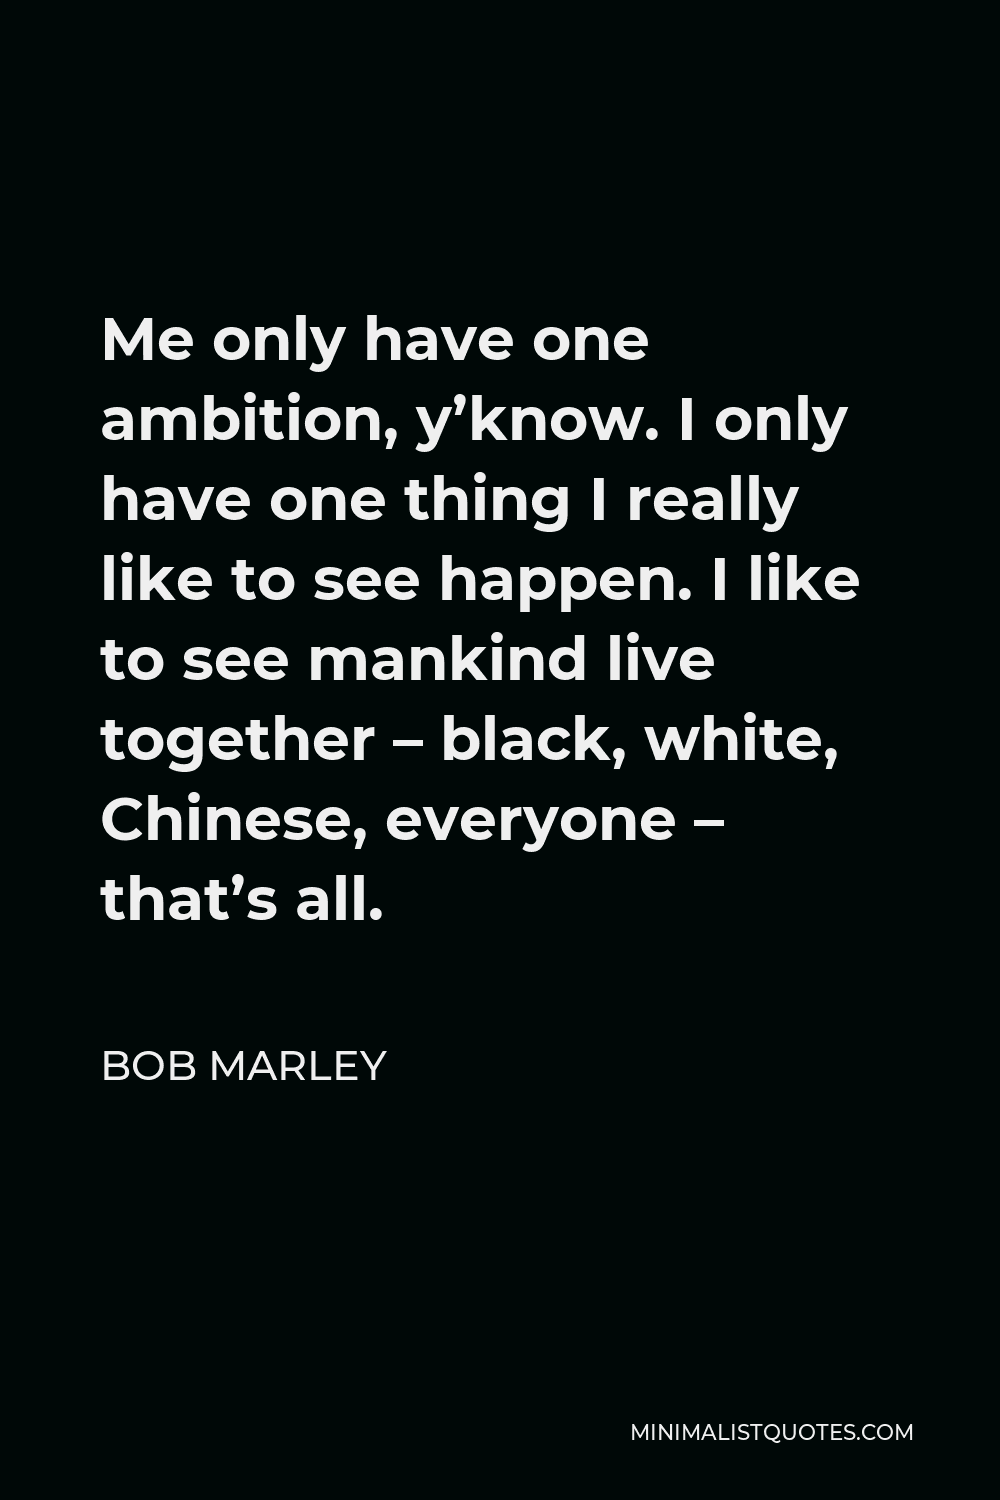 Bob Marley Quote Me Only Have One Ambition Y Know I Only Have One Thing I Really Like To See Happen I Like To See Mankind Live Together Black White Chinese Everyone